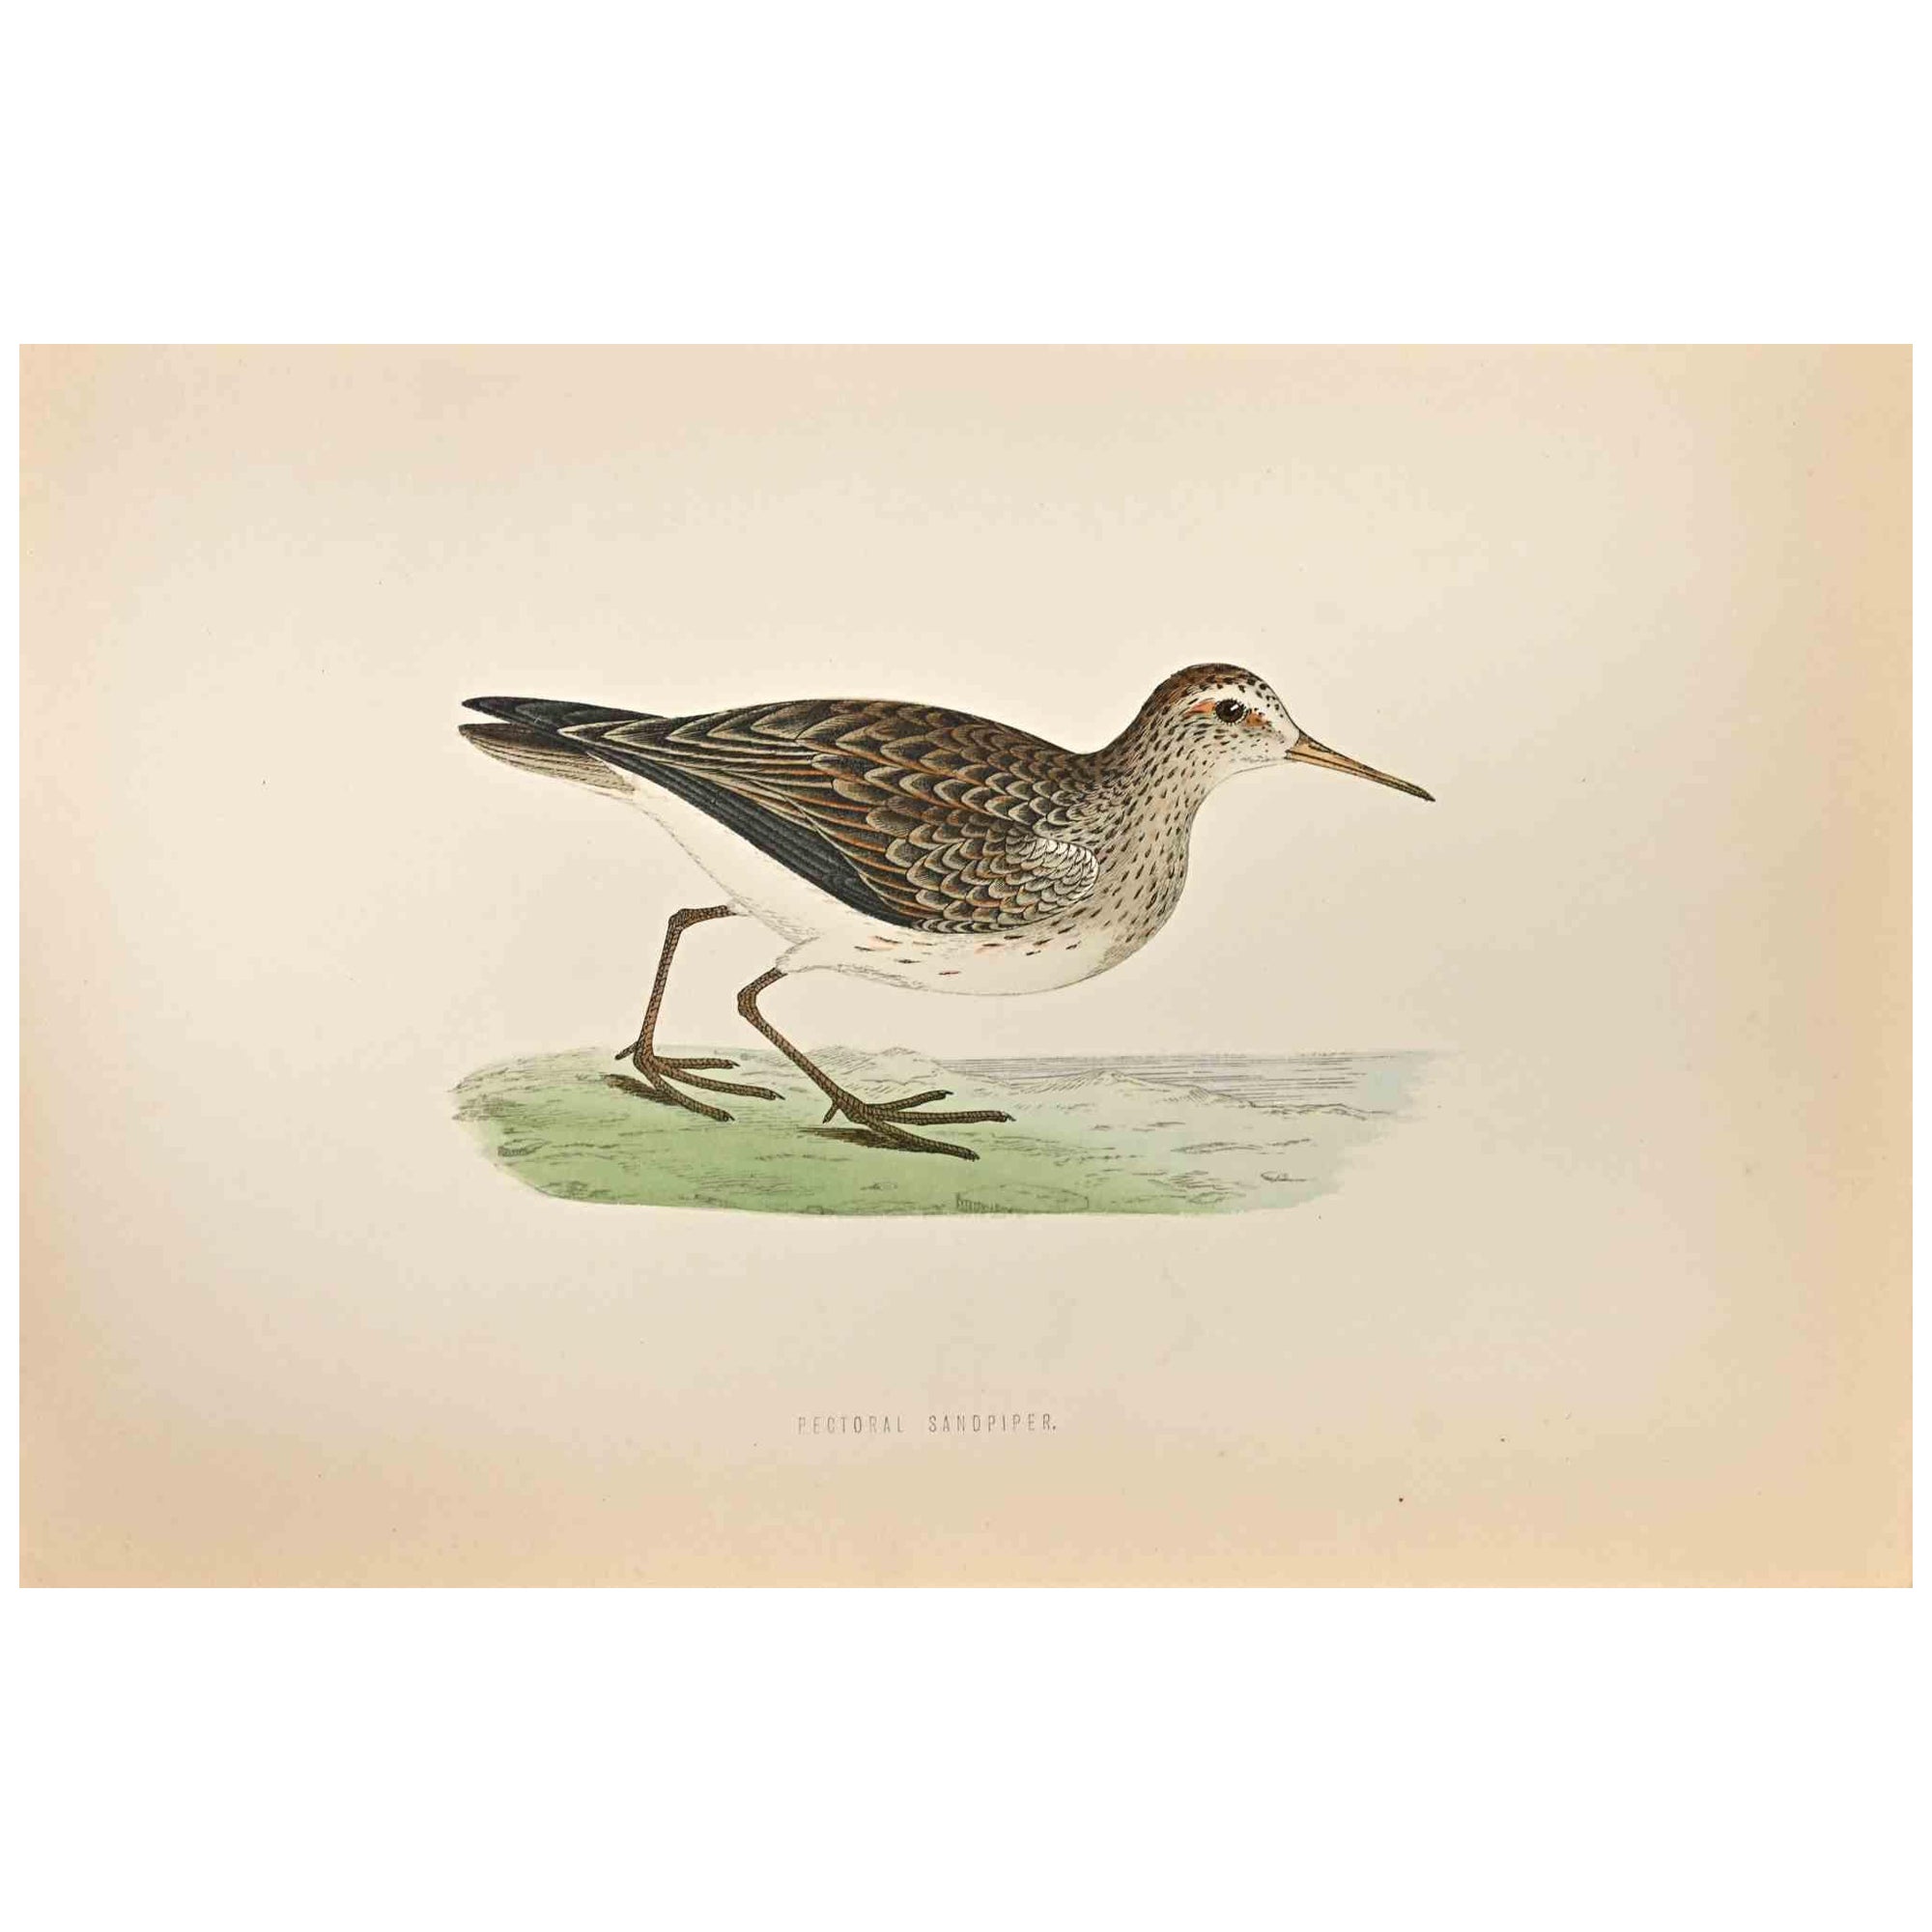 Pectoral  Sandpiper is a modern artwork realized in 1870 by the British artist Alexander Francis Lydon (1836-1917).

Woodcut print on ivory-colored paper.

Hand-colored, published by London, Bell & Sons, 1870.  

The name of the bird is printed on